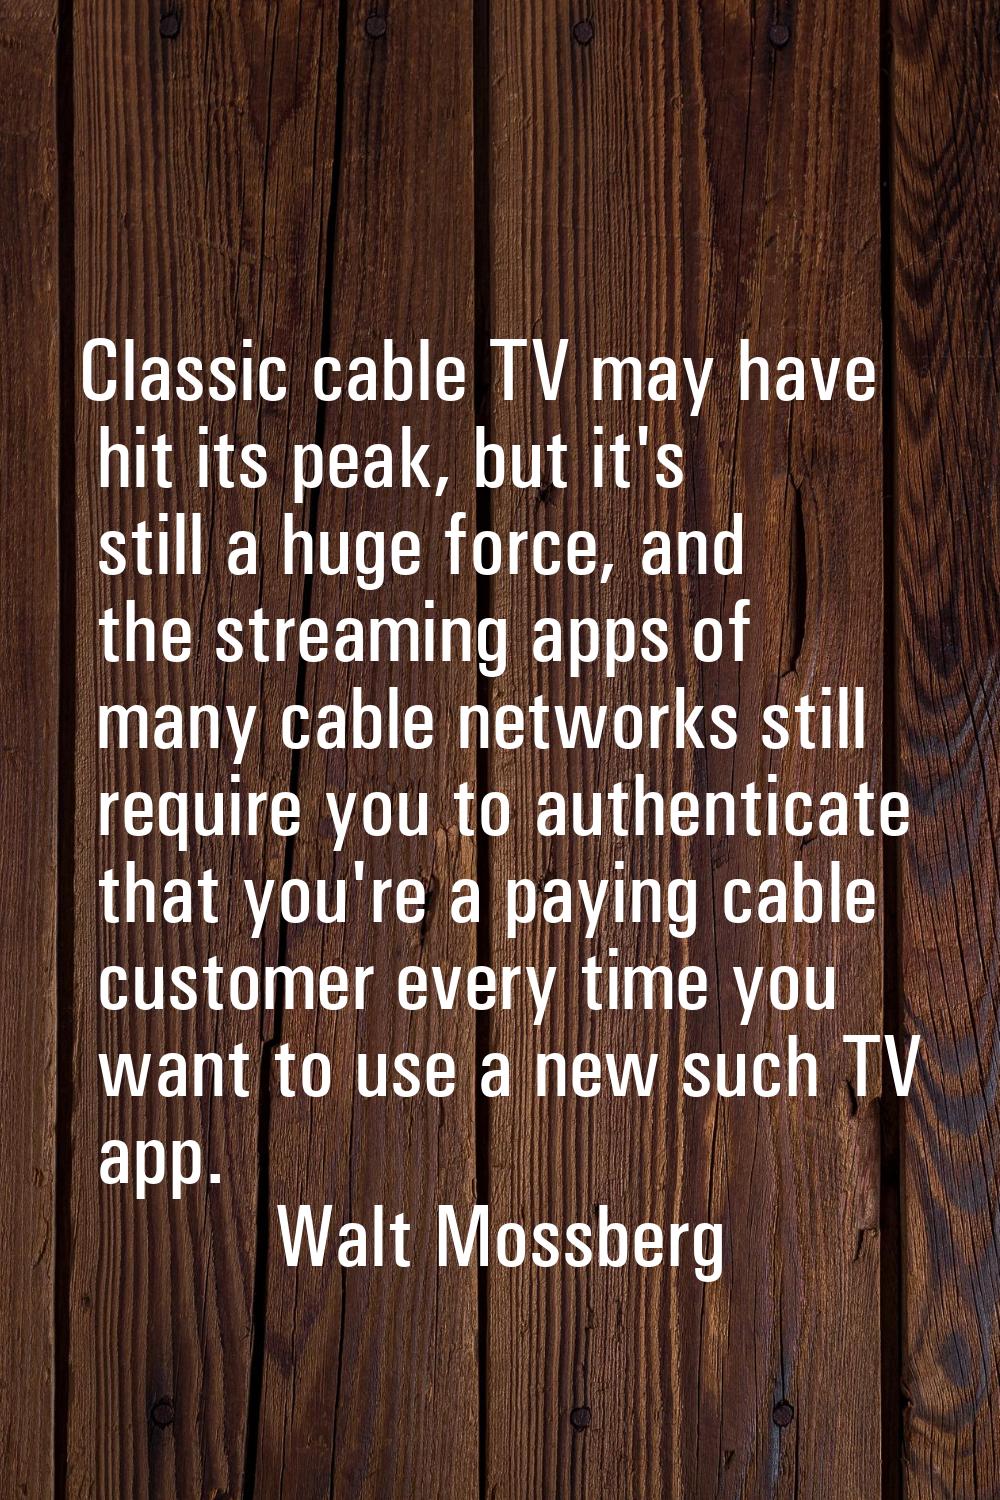 Classic cable TV may have hit its peak, but it's still a huge force, and the streaming apps of many